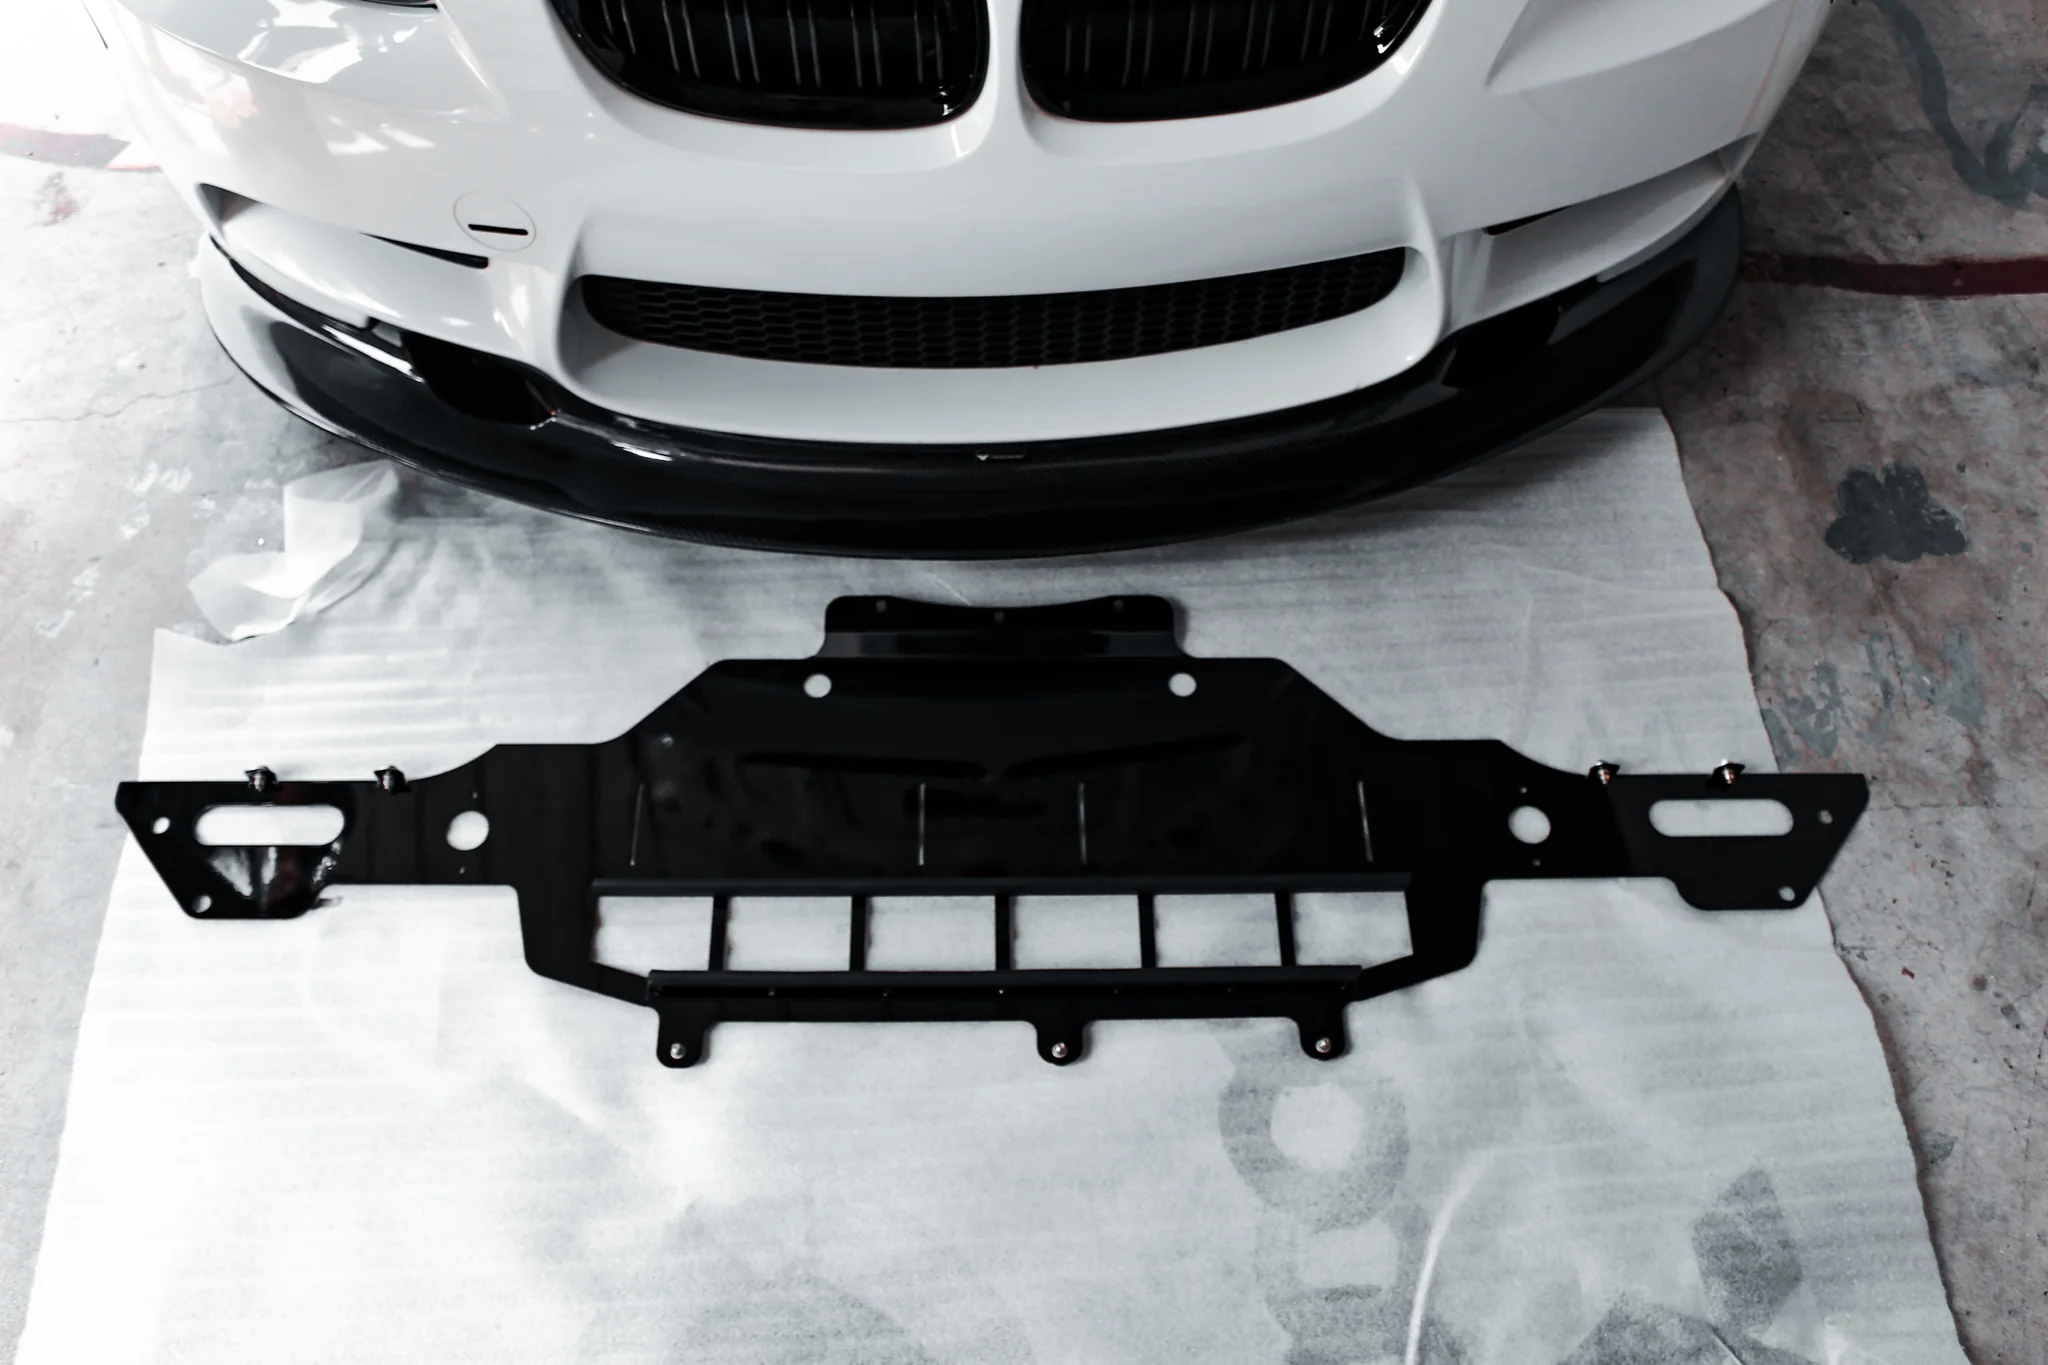 Why would you upgrade the undertray on your E92 M3? What does a skidplate do and what’s the cost?